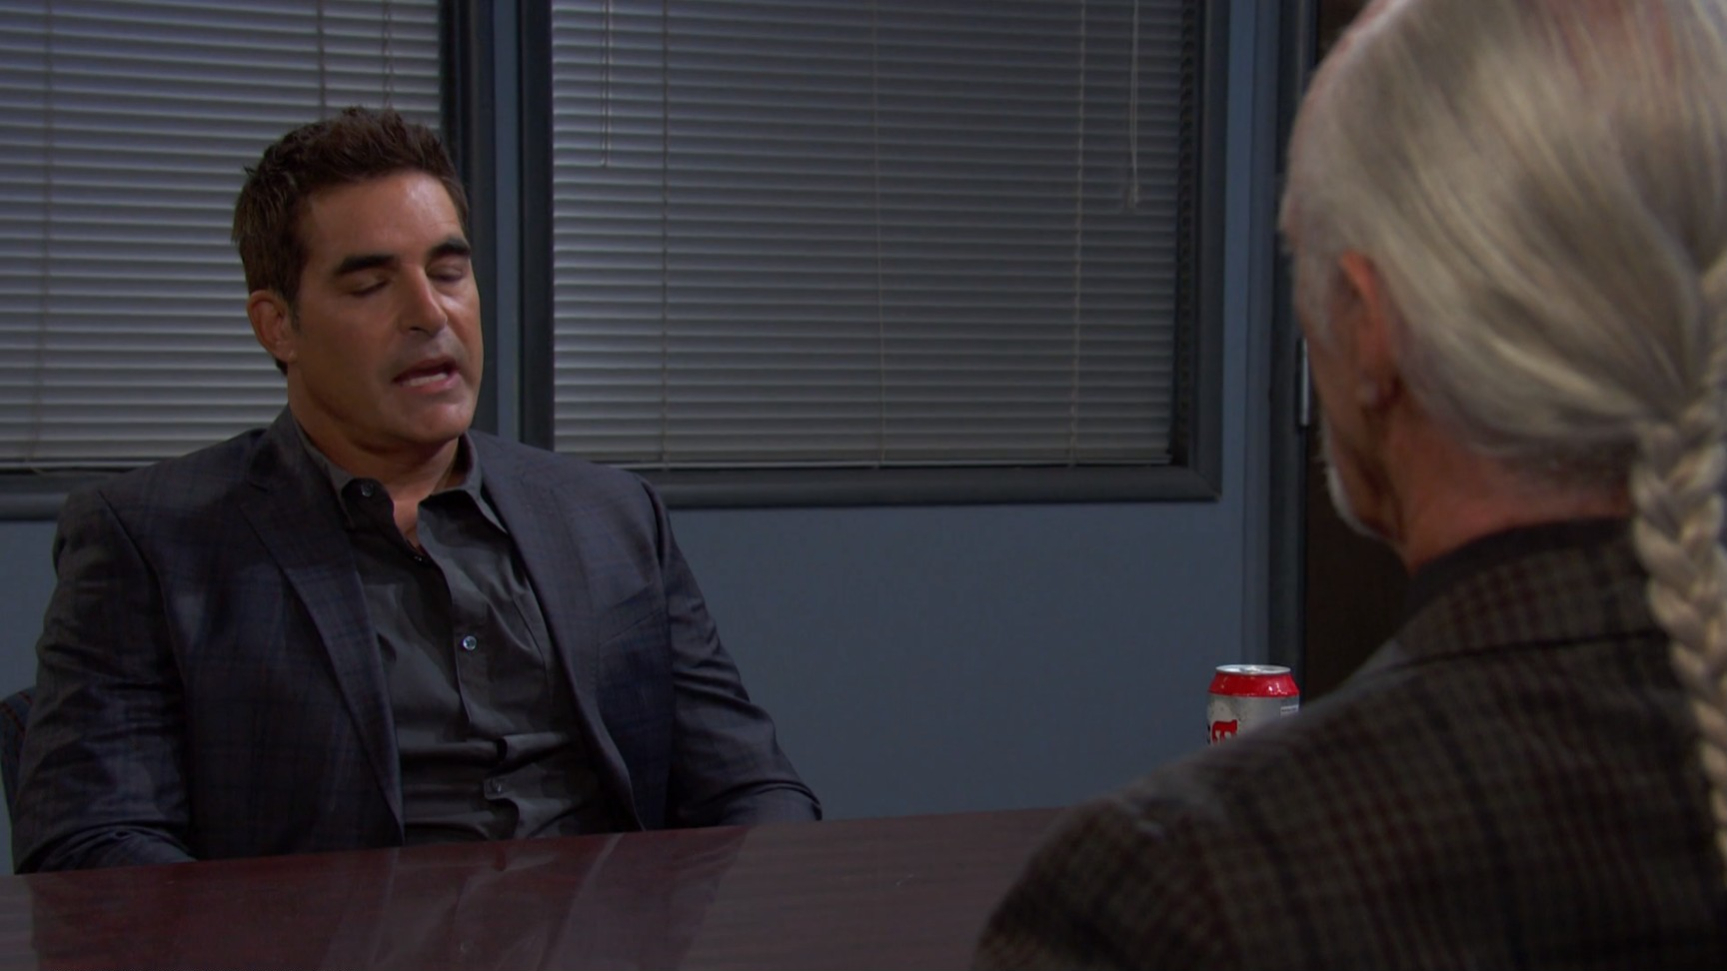 rafe interrogates rolf Days of our lives recaps Soapsspoilers